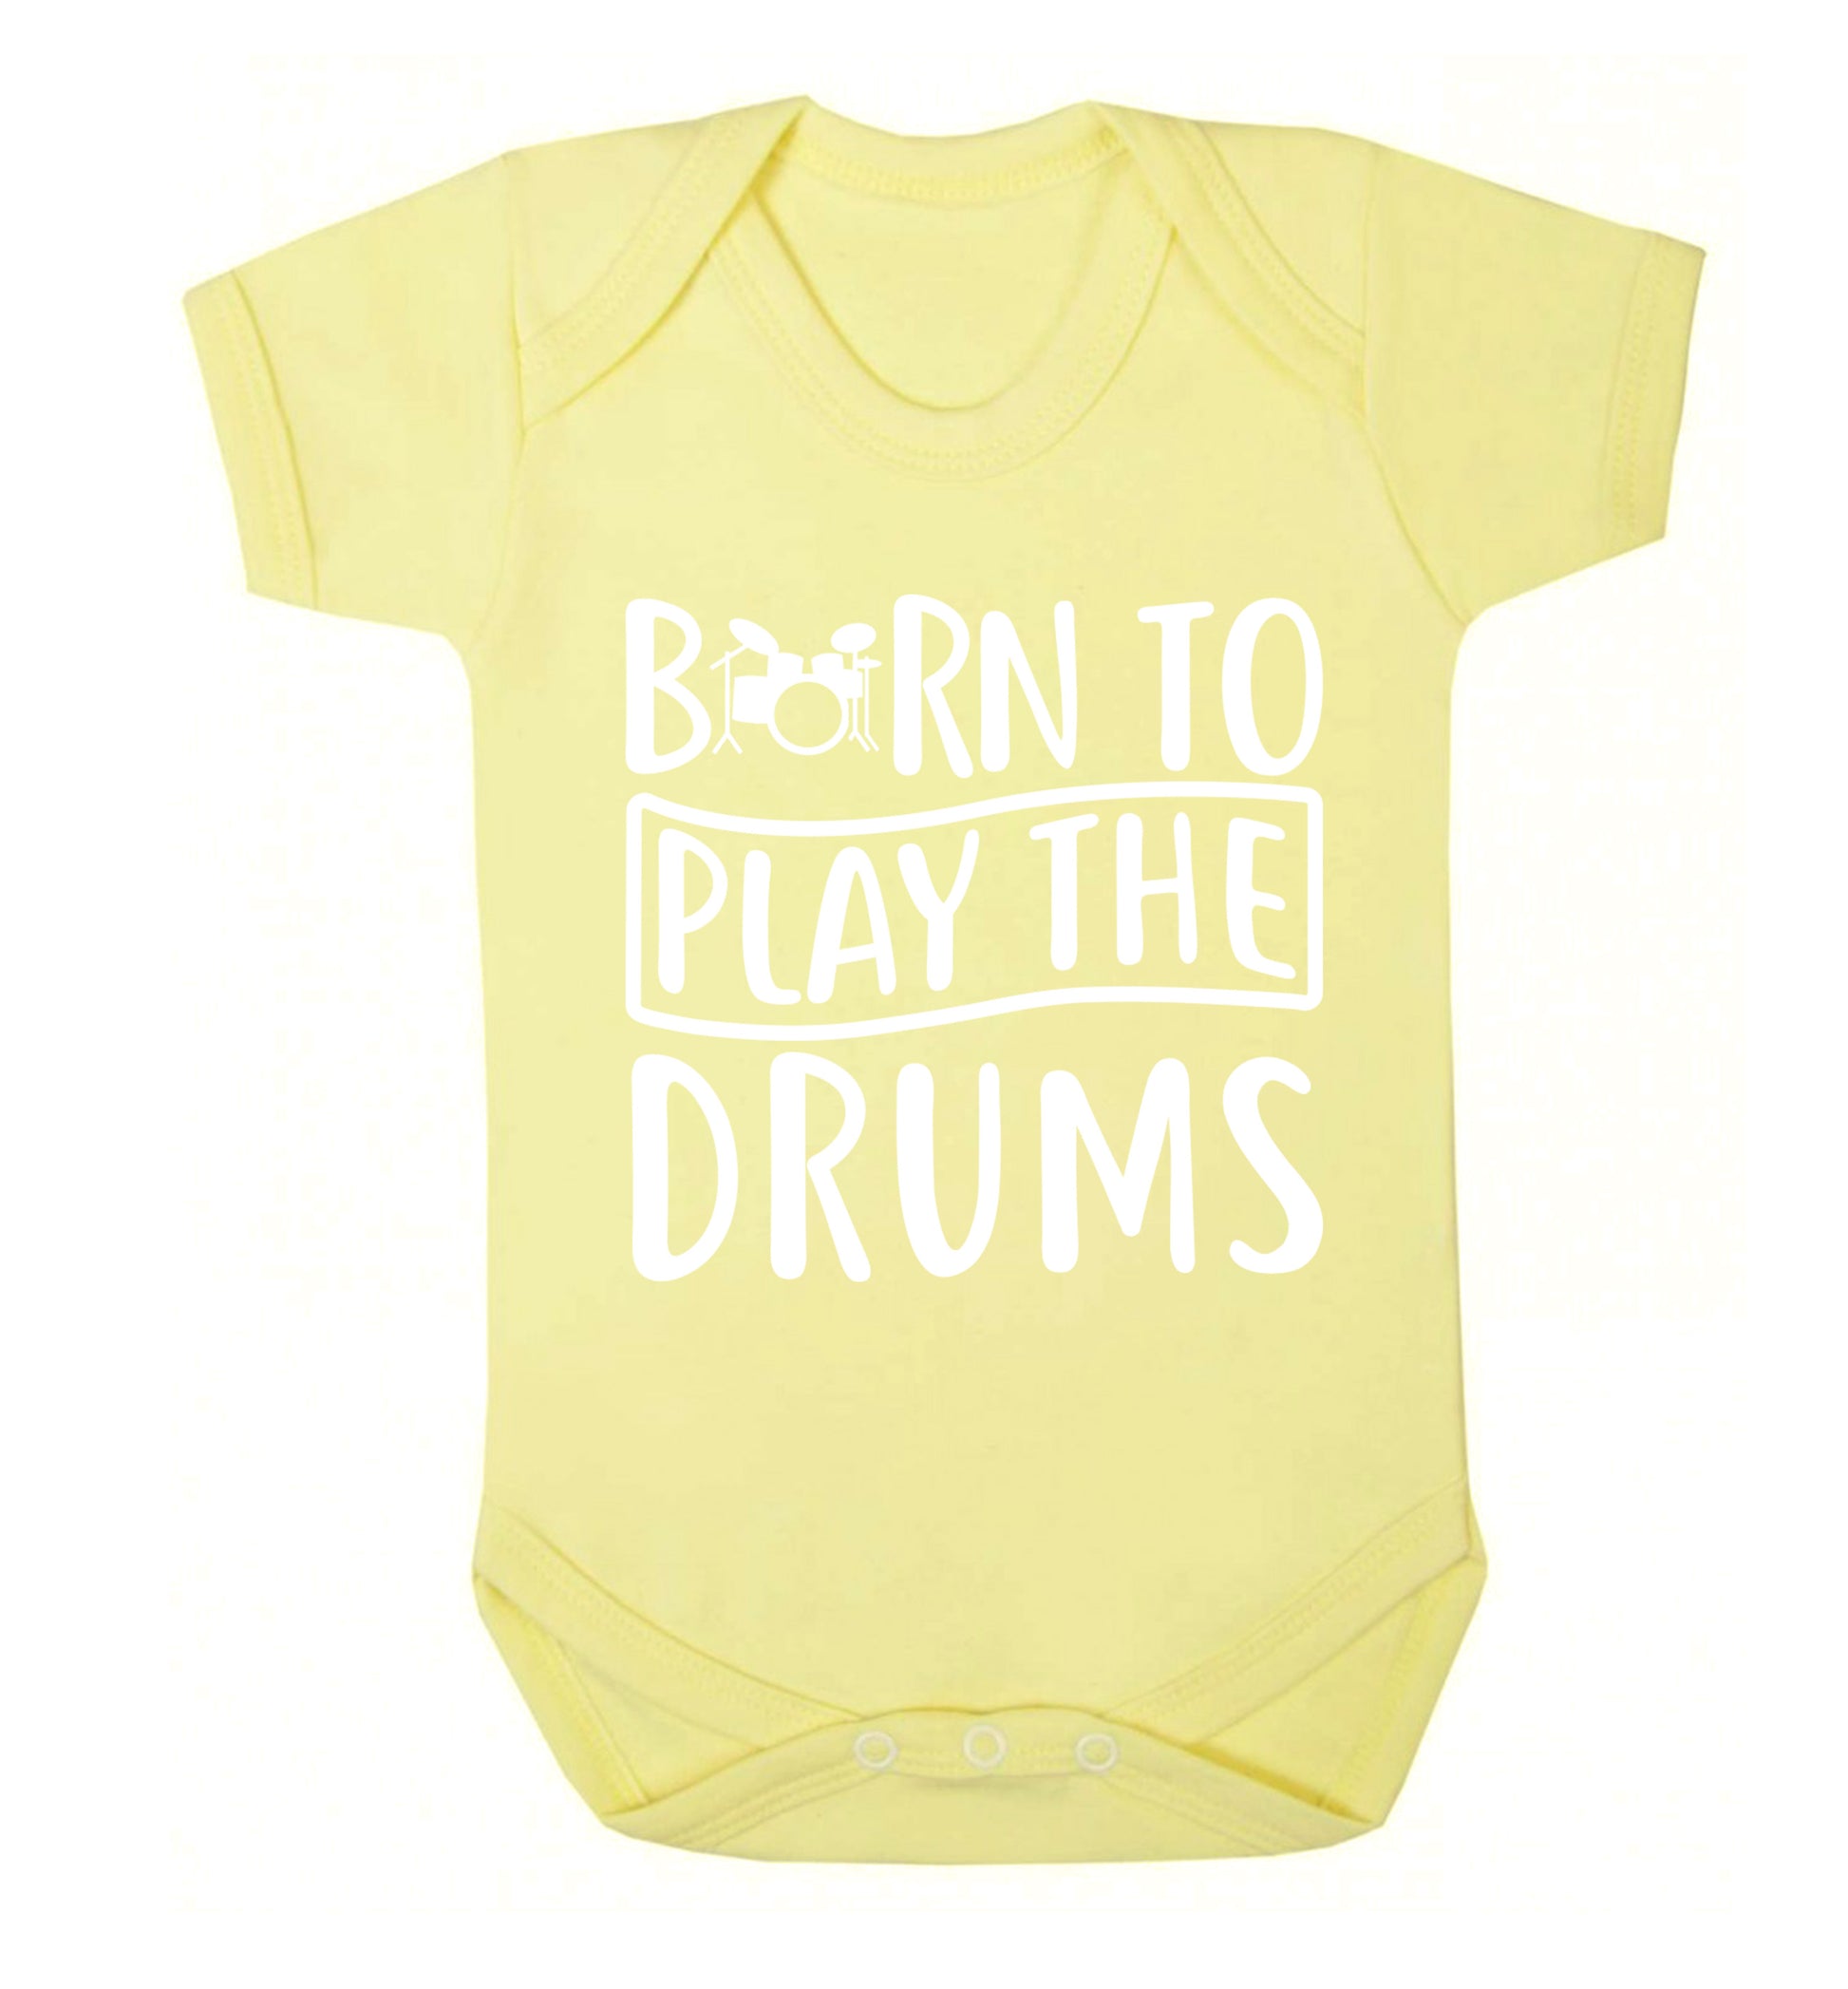 Born to play the drums Baby Vest pale yellow 18-24 months